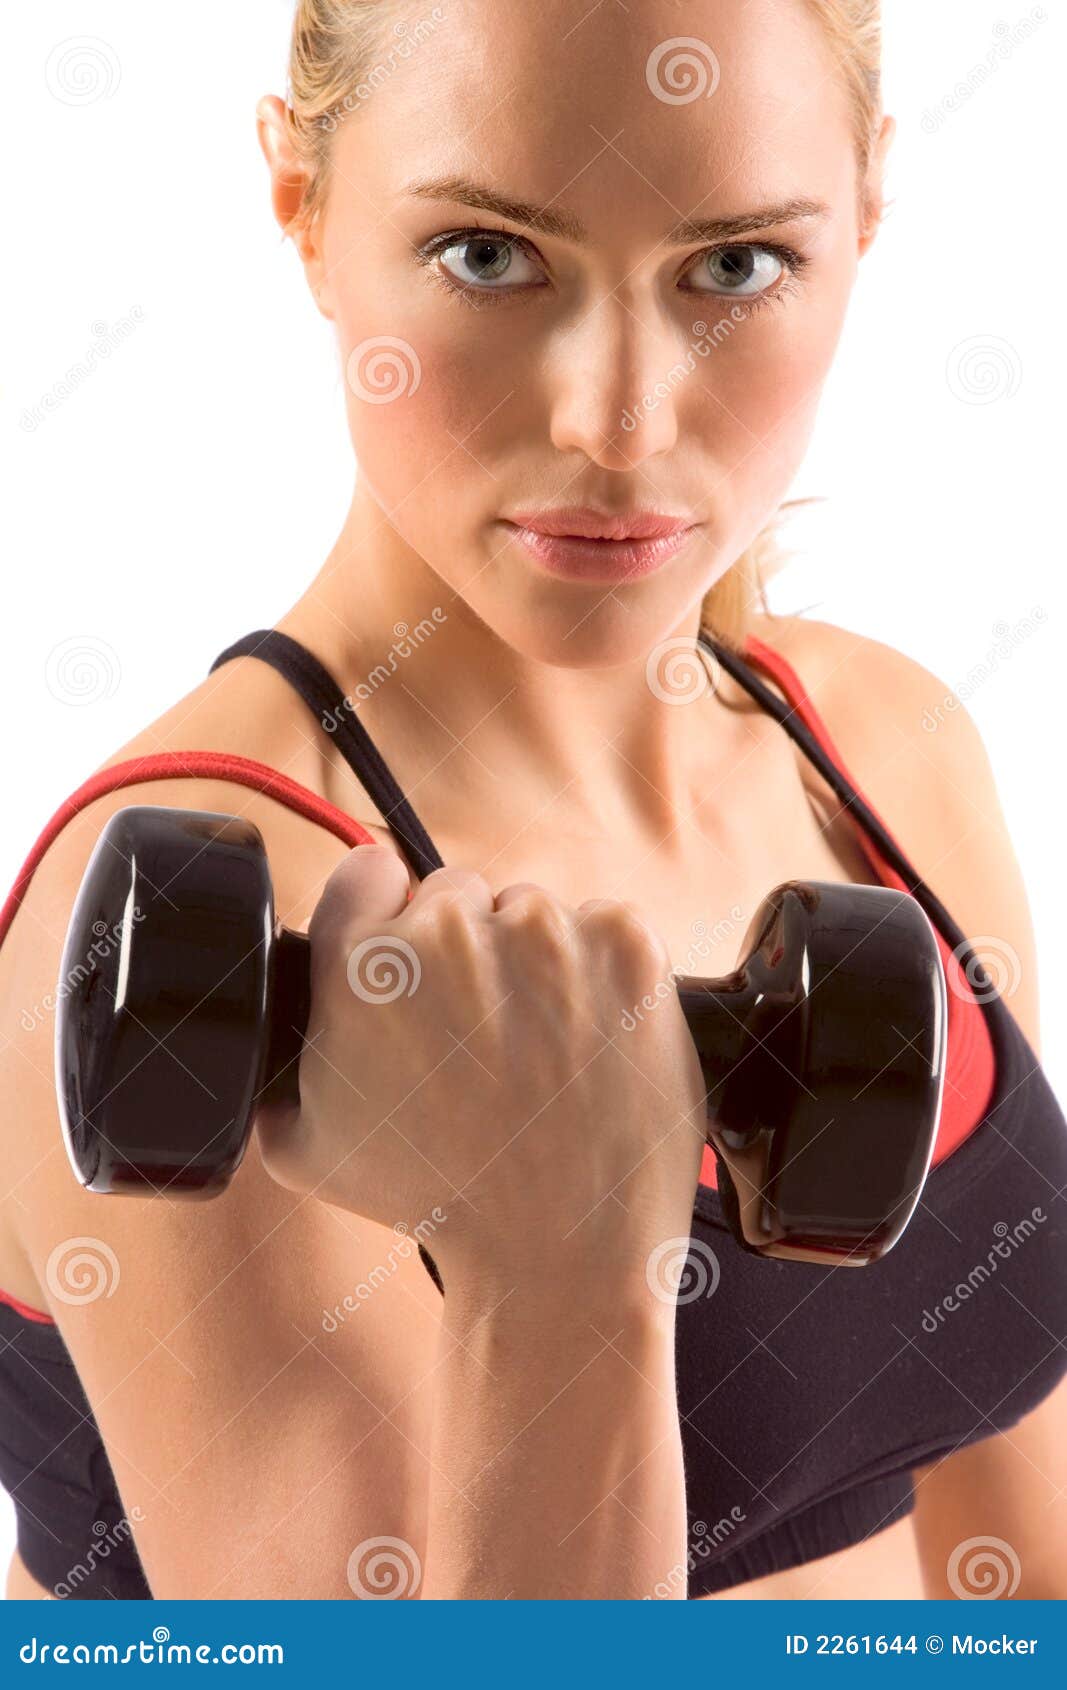 dumbbell woman weight workout in gym